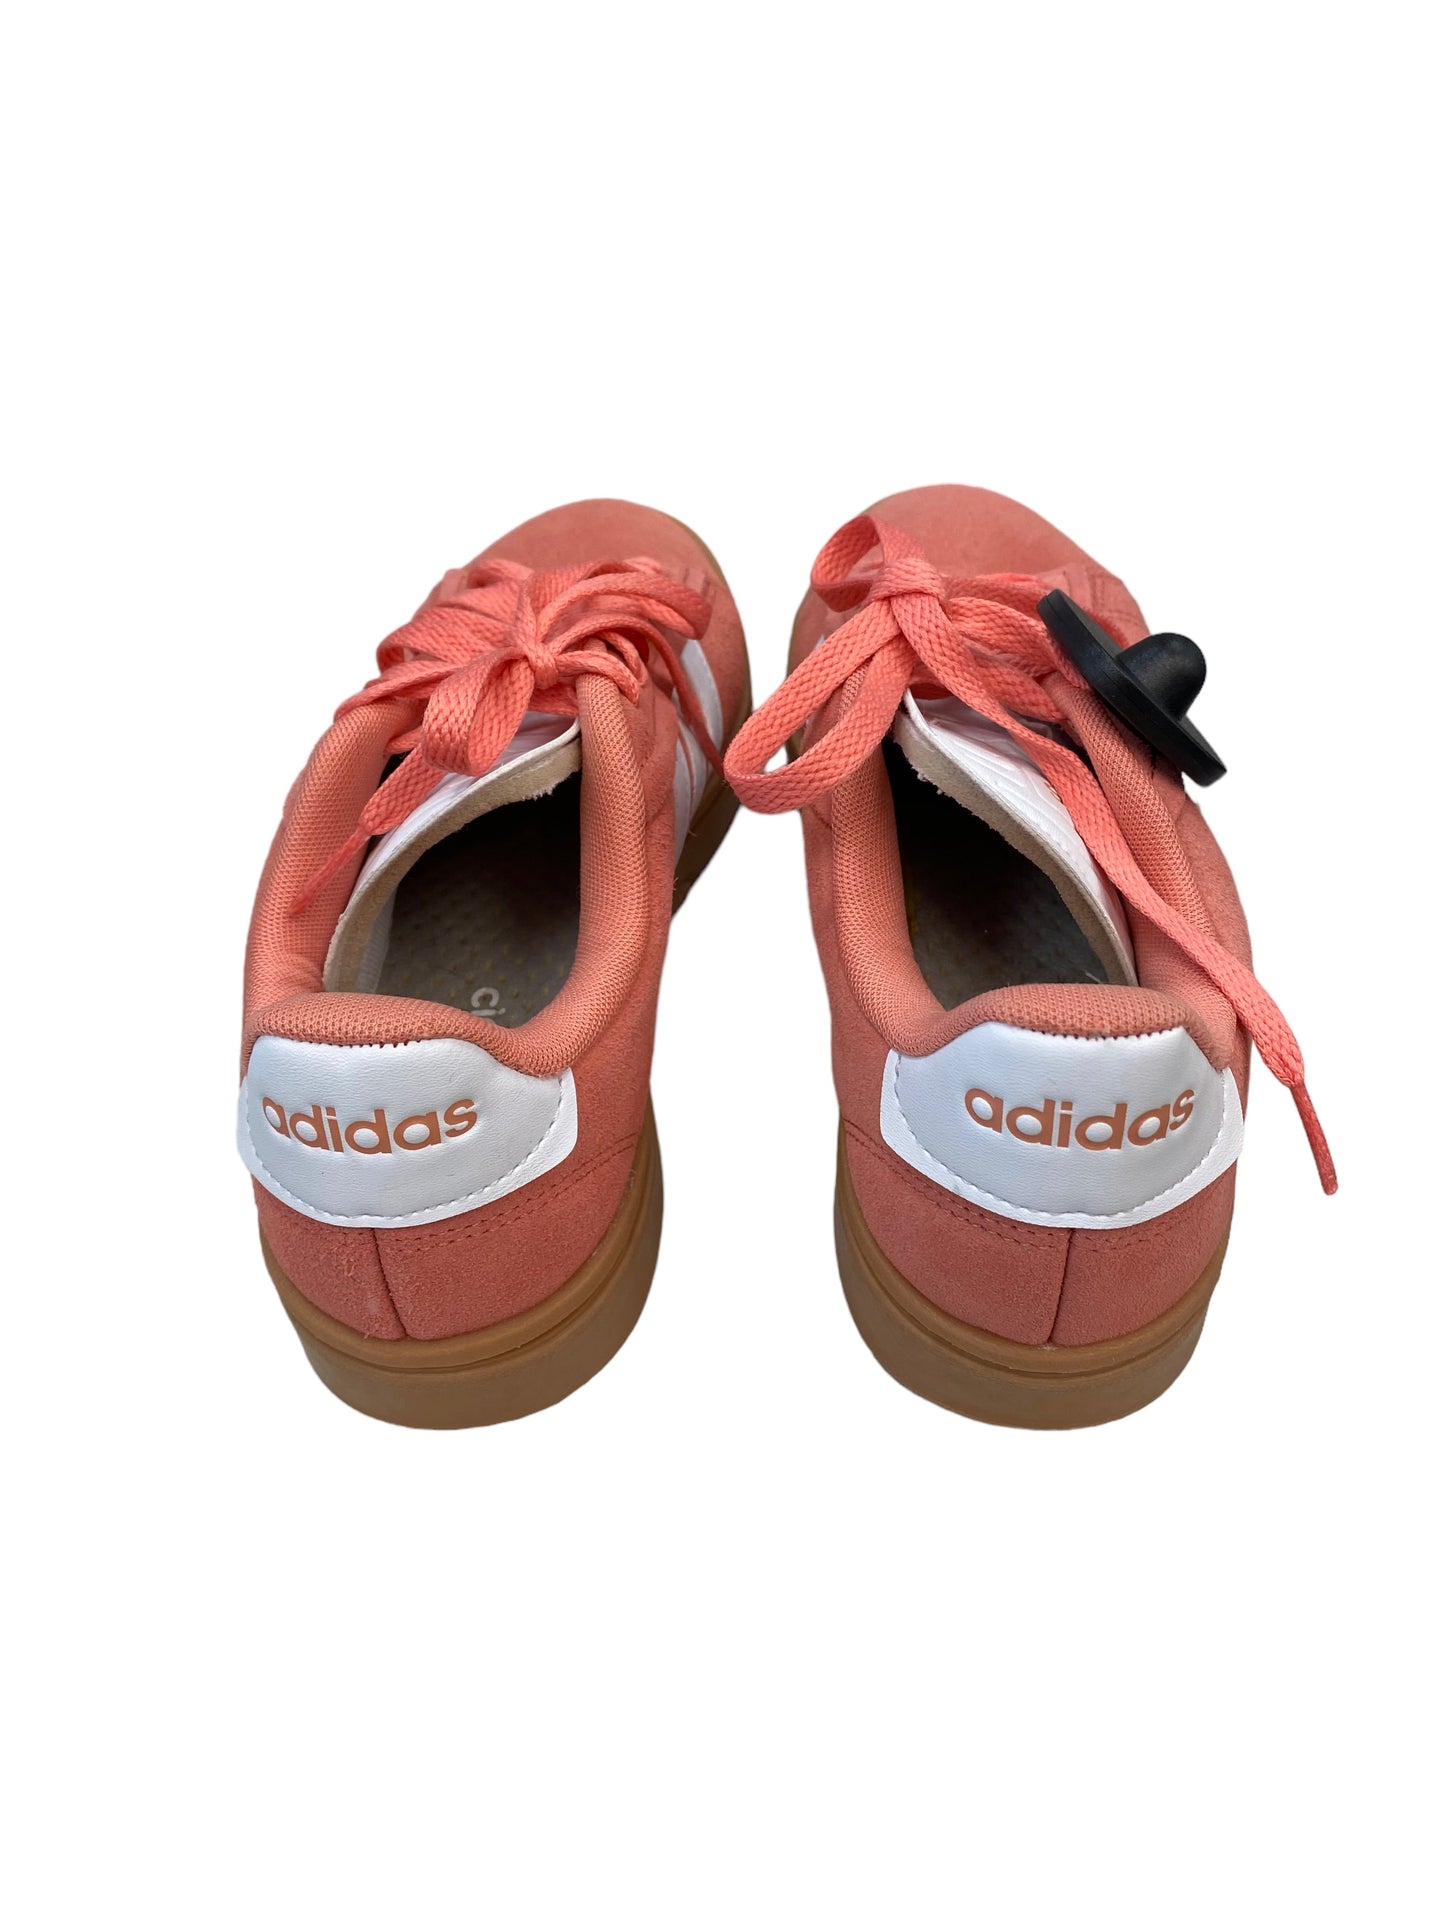 Coral Shoes Sneakers Adidas, Size 6.5